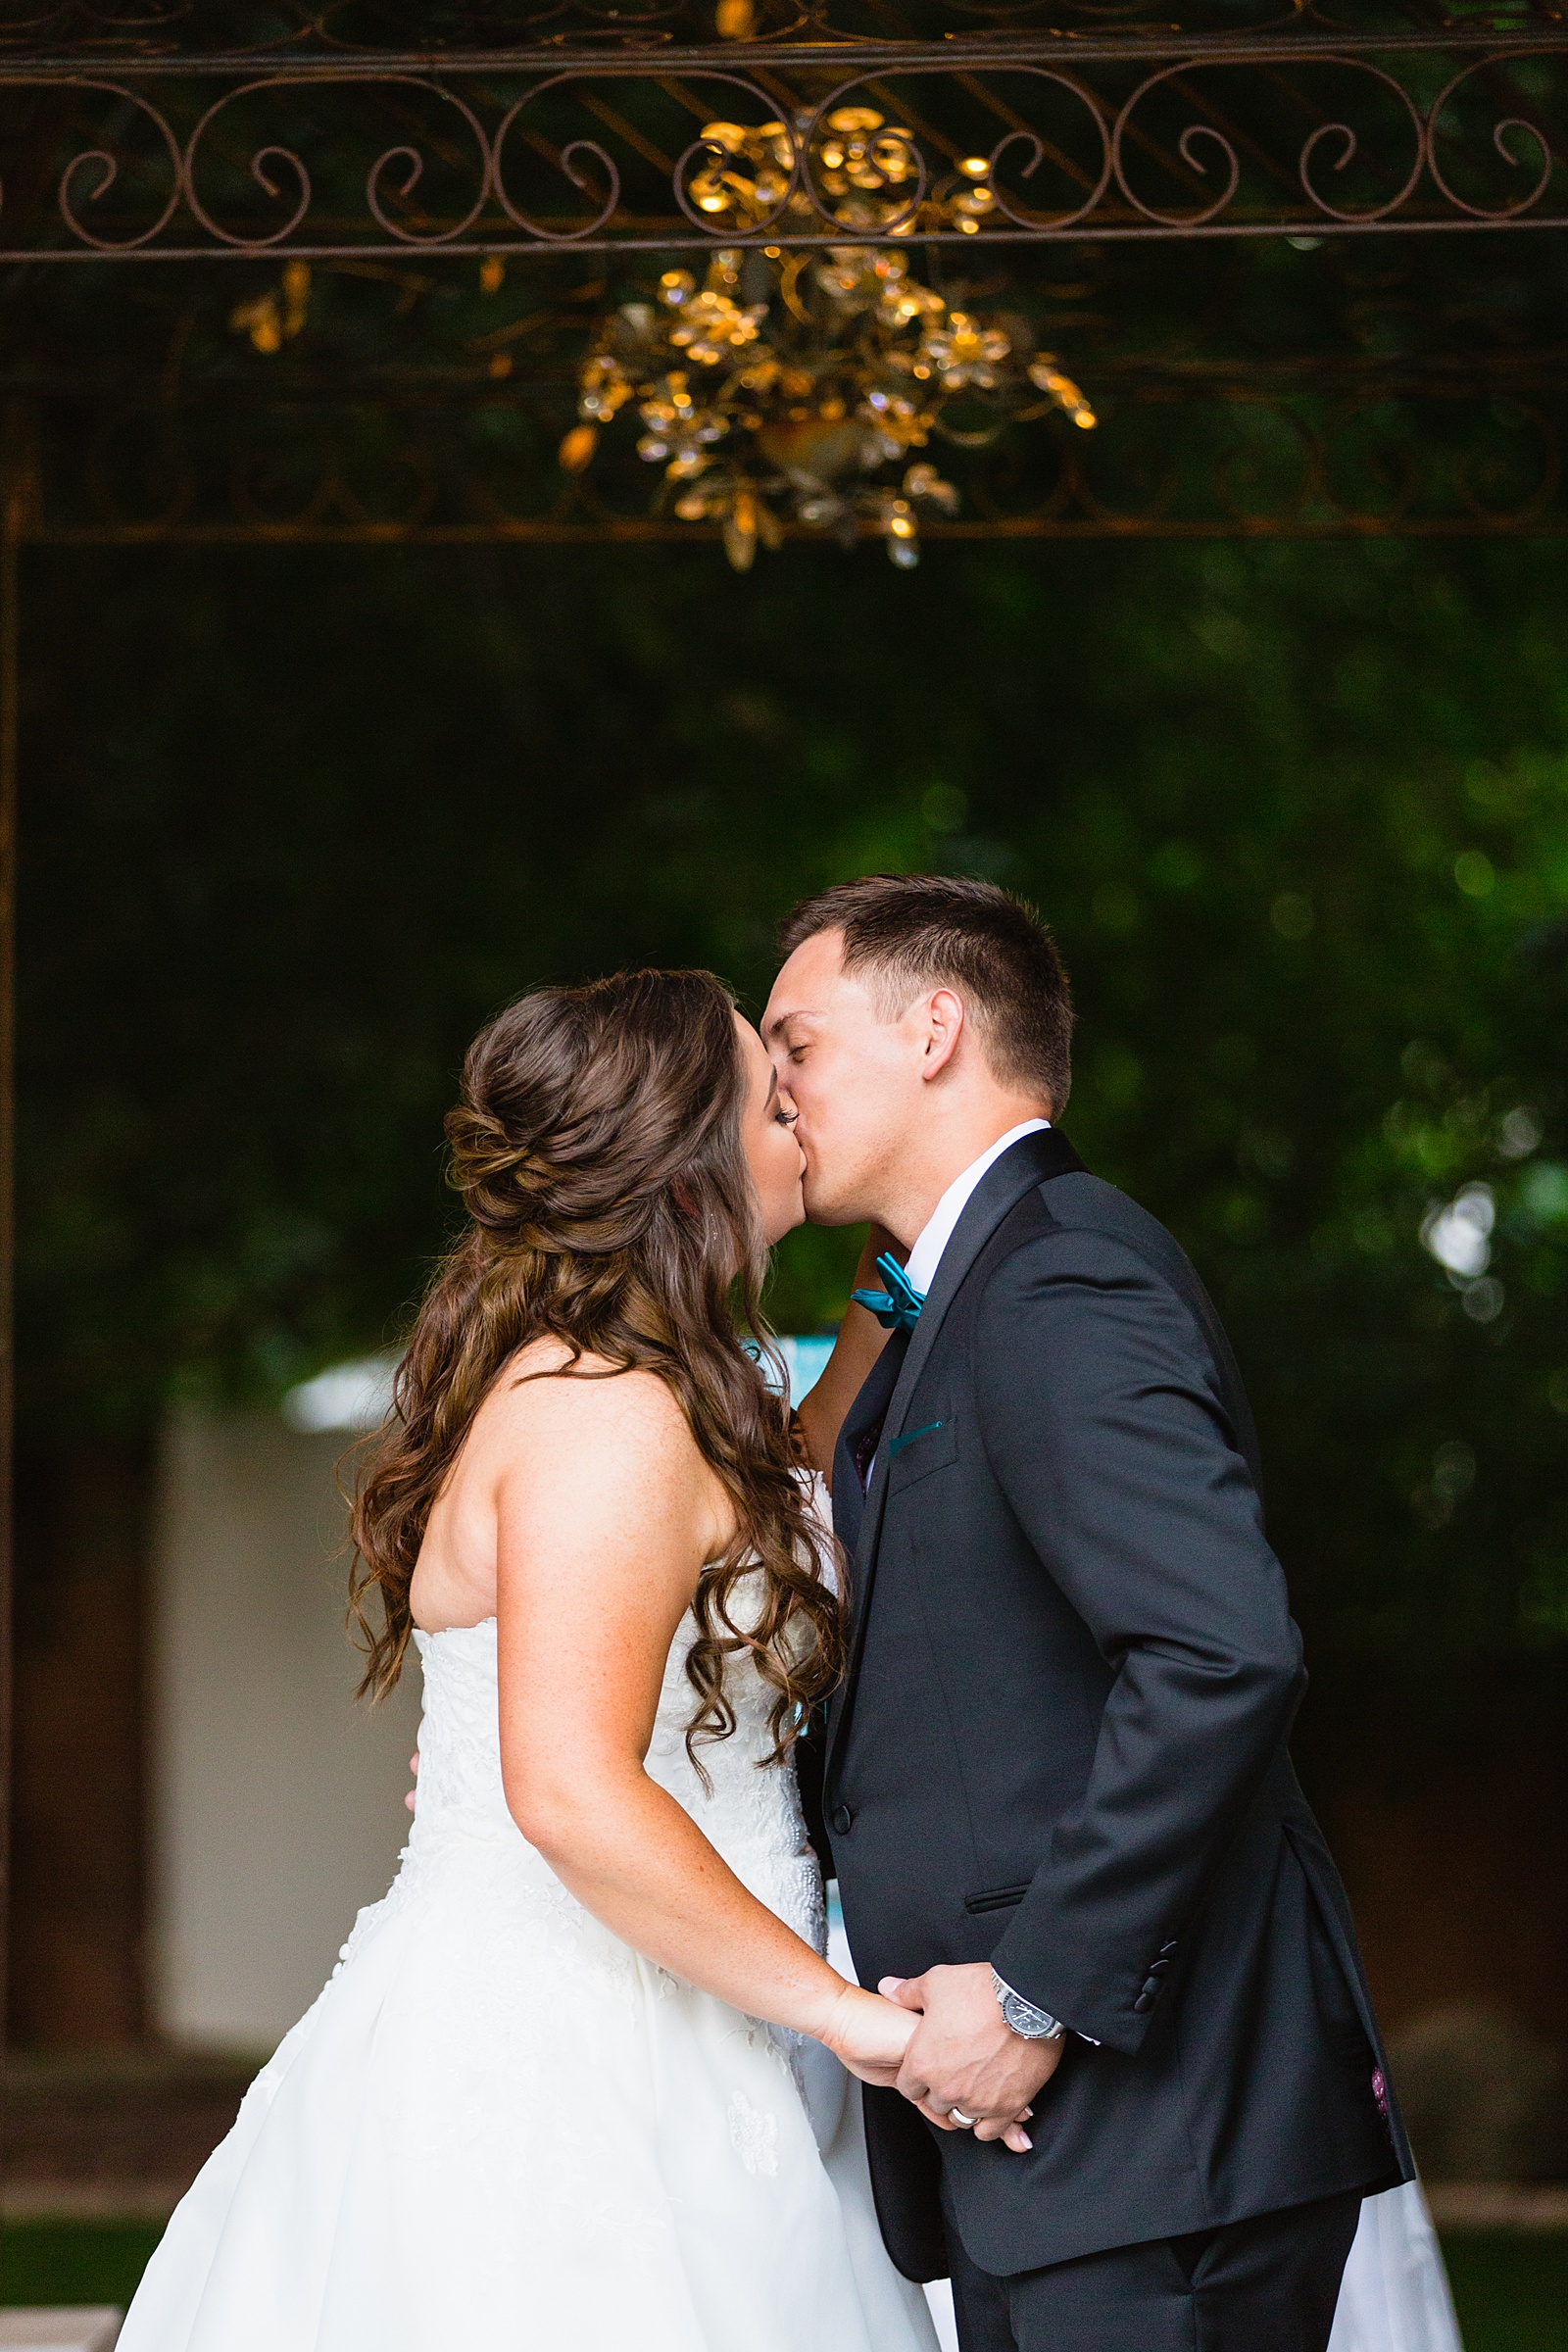 Bride and groom share their first kiss during their wedding ceremony at Stonebridge Manor by Arizona wedding photographer PMA Photography.